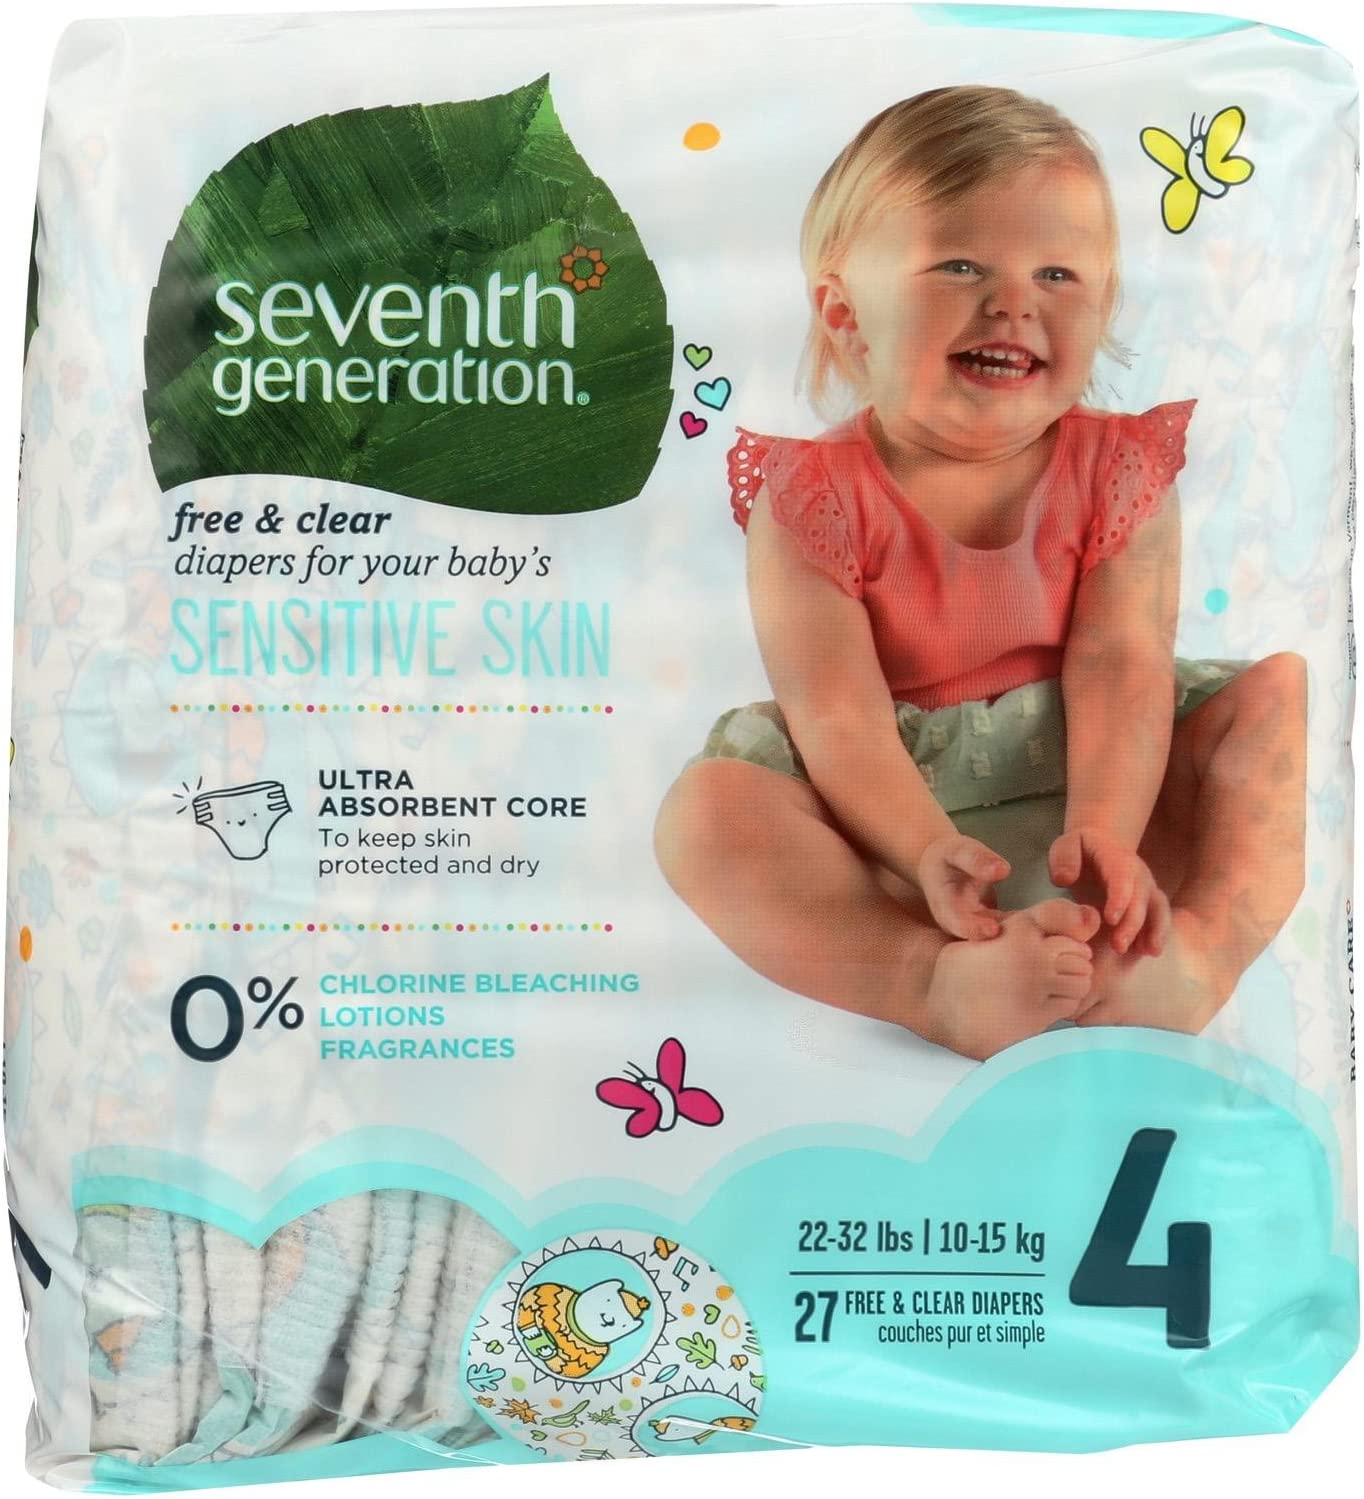 Seventh Generation Baby Diapers, Free-and-Clear for Sensitive Skin, Original Unprinted, Size 4, 27 Count